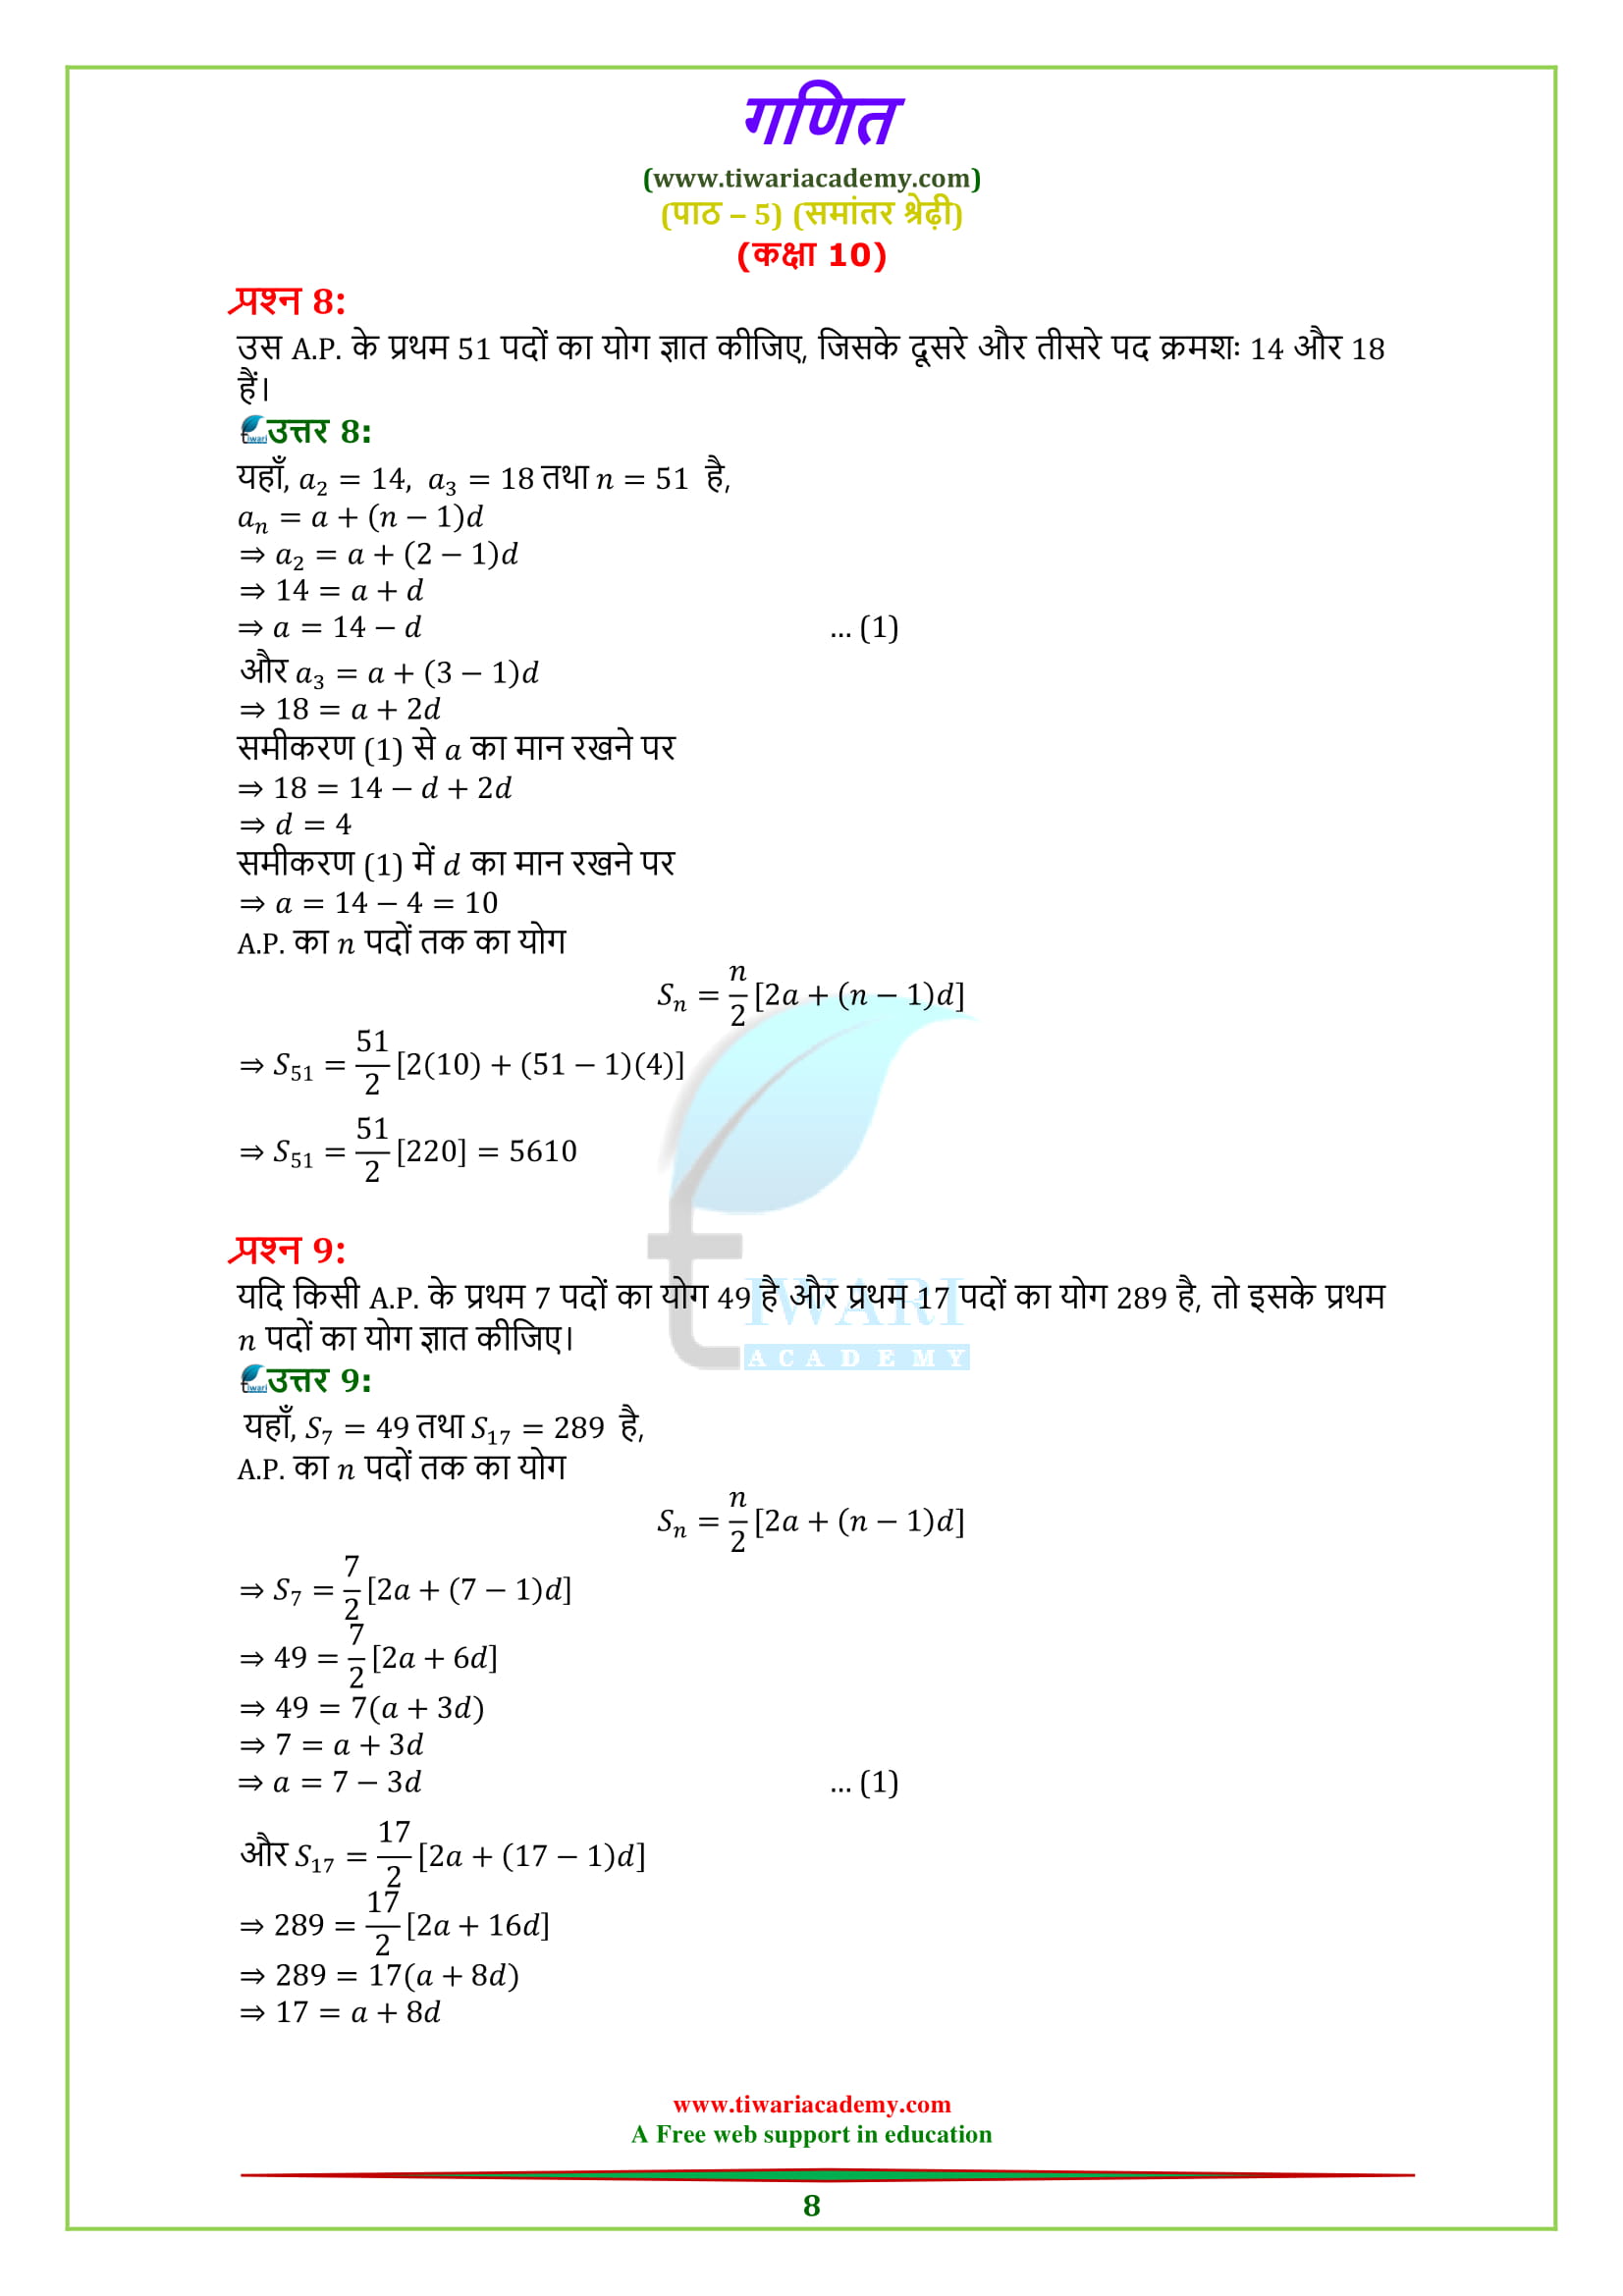 Class 10 Maths Chapter 5 Exercise 5.3 Solutions Questions 1, 2, 3, 4, 5, 5, 6, 7, 8, 9, 10